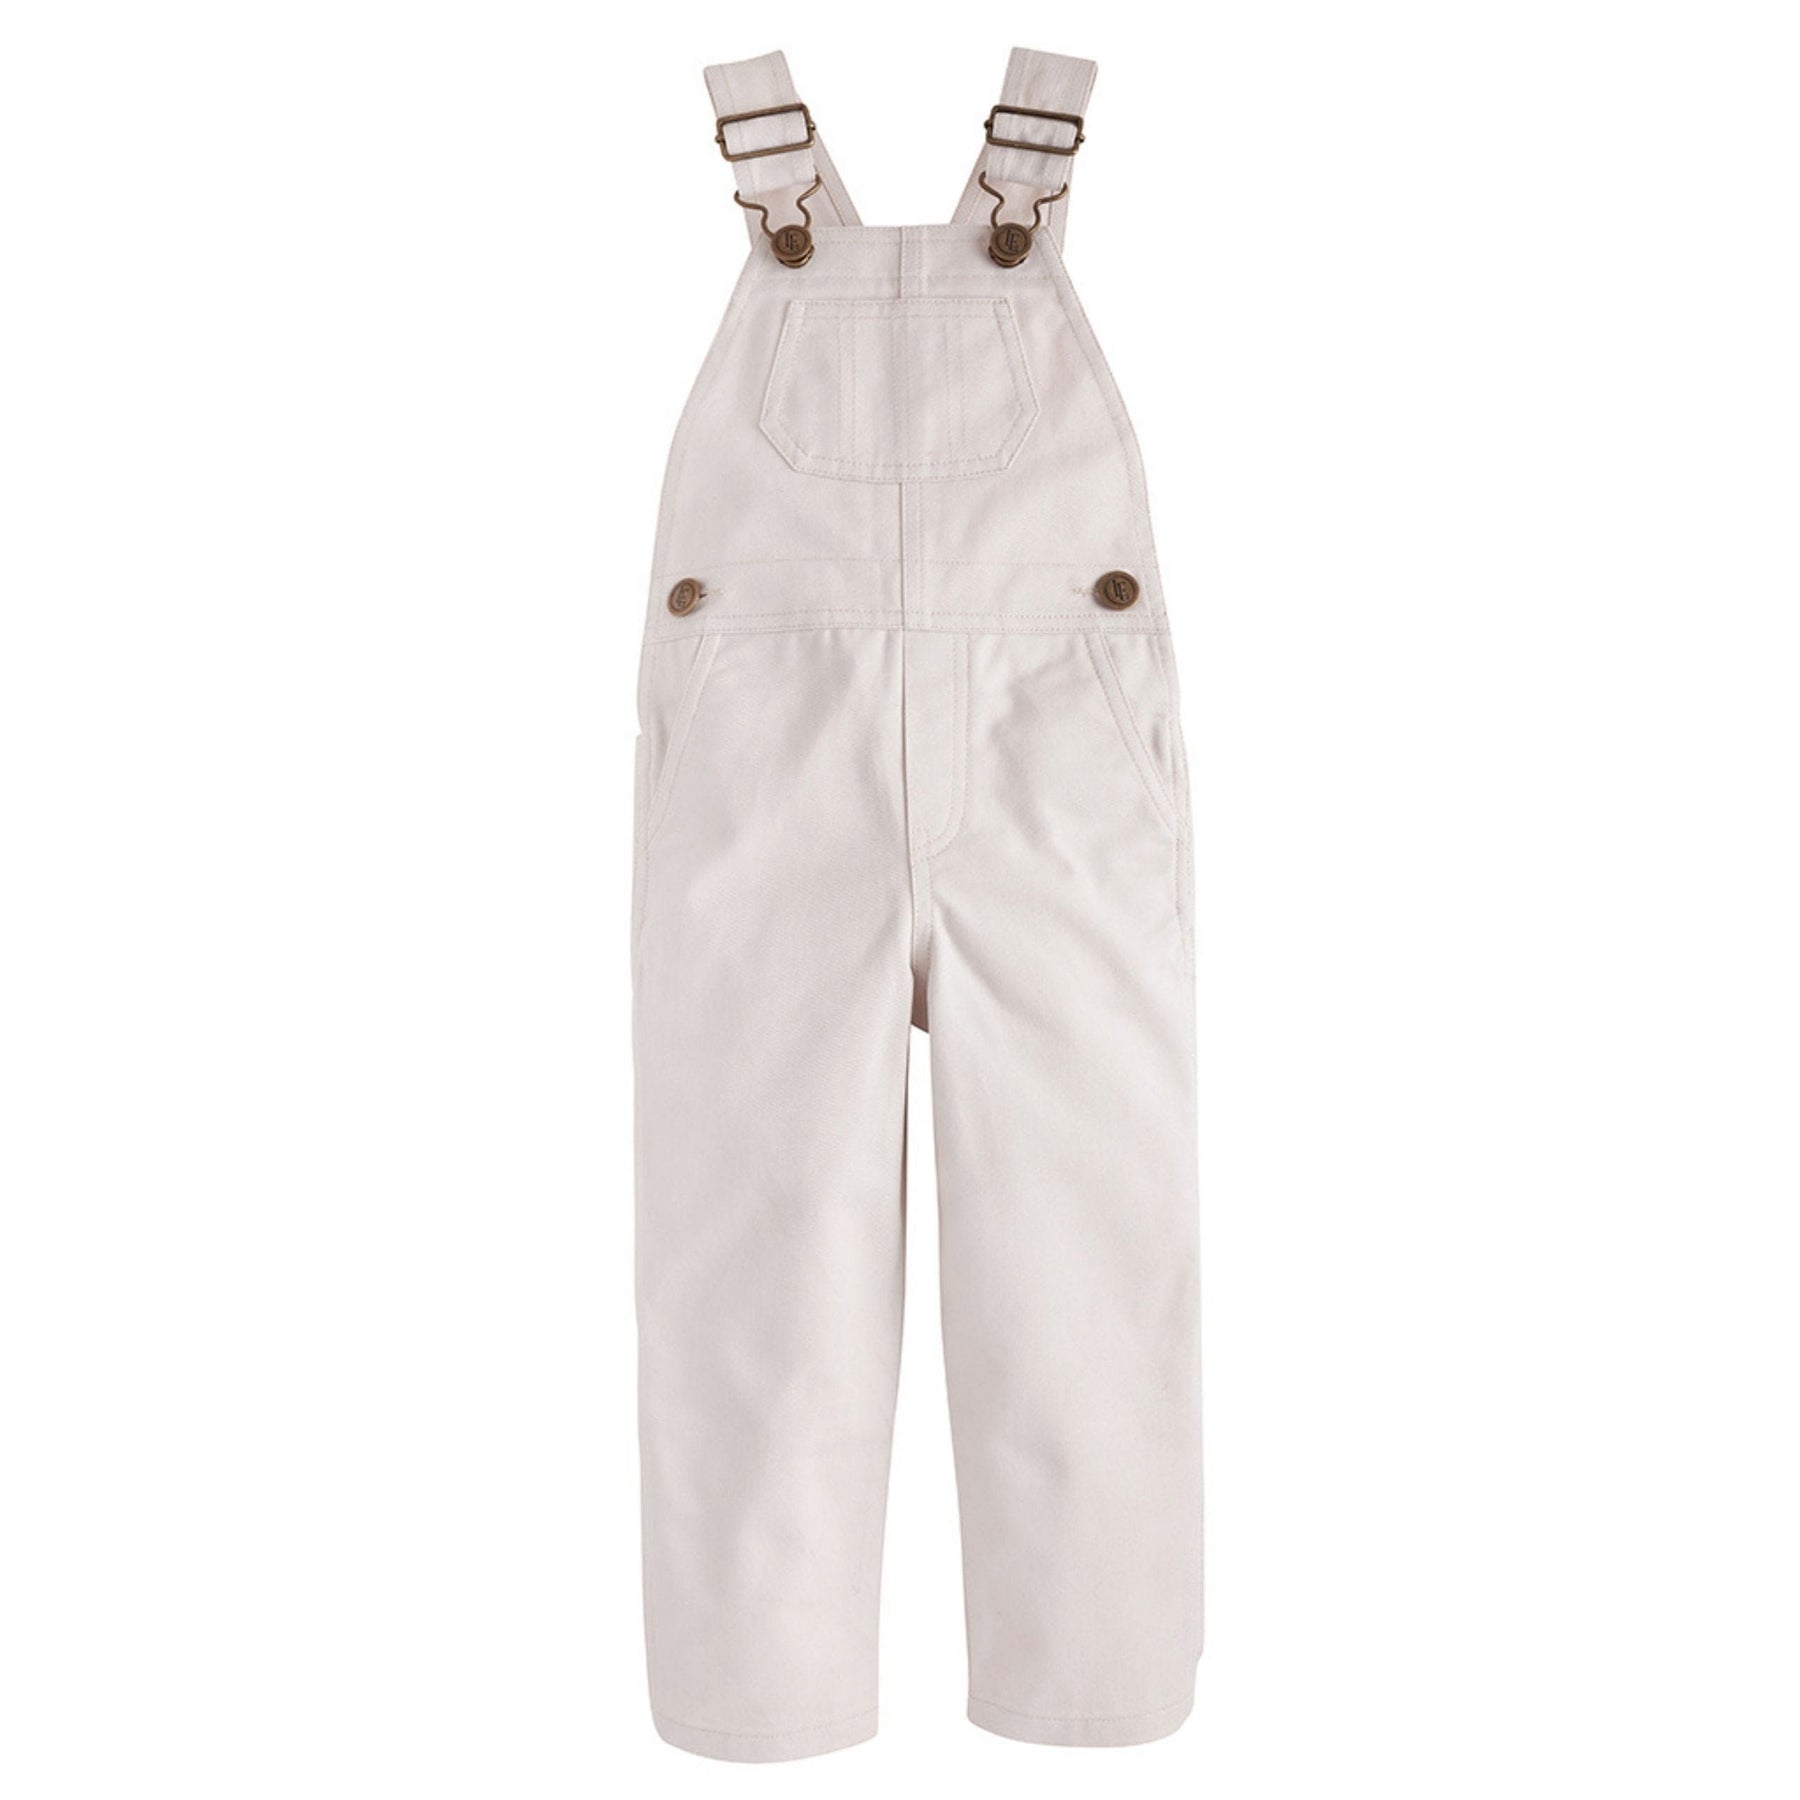 seguridadindustrialcr classic childrens clothing boy khaki twill overall with brass buttons